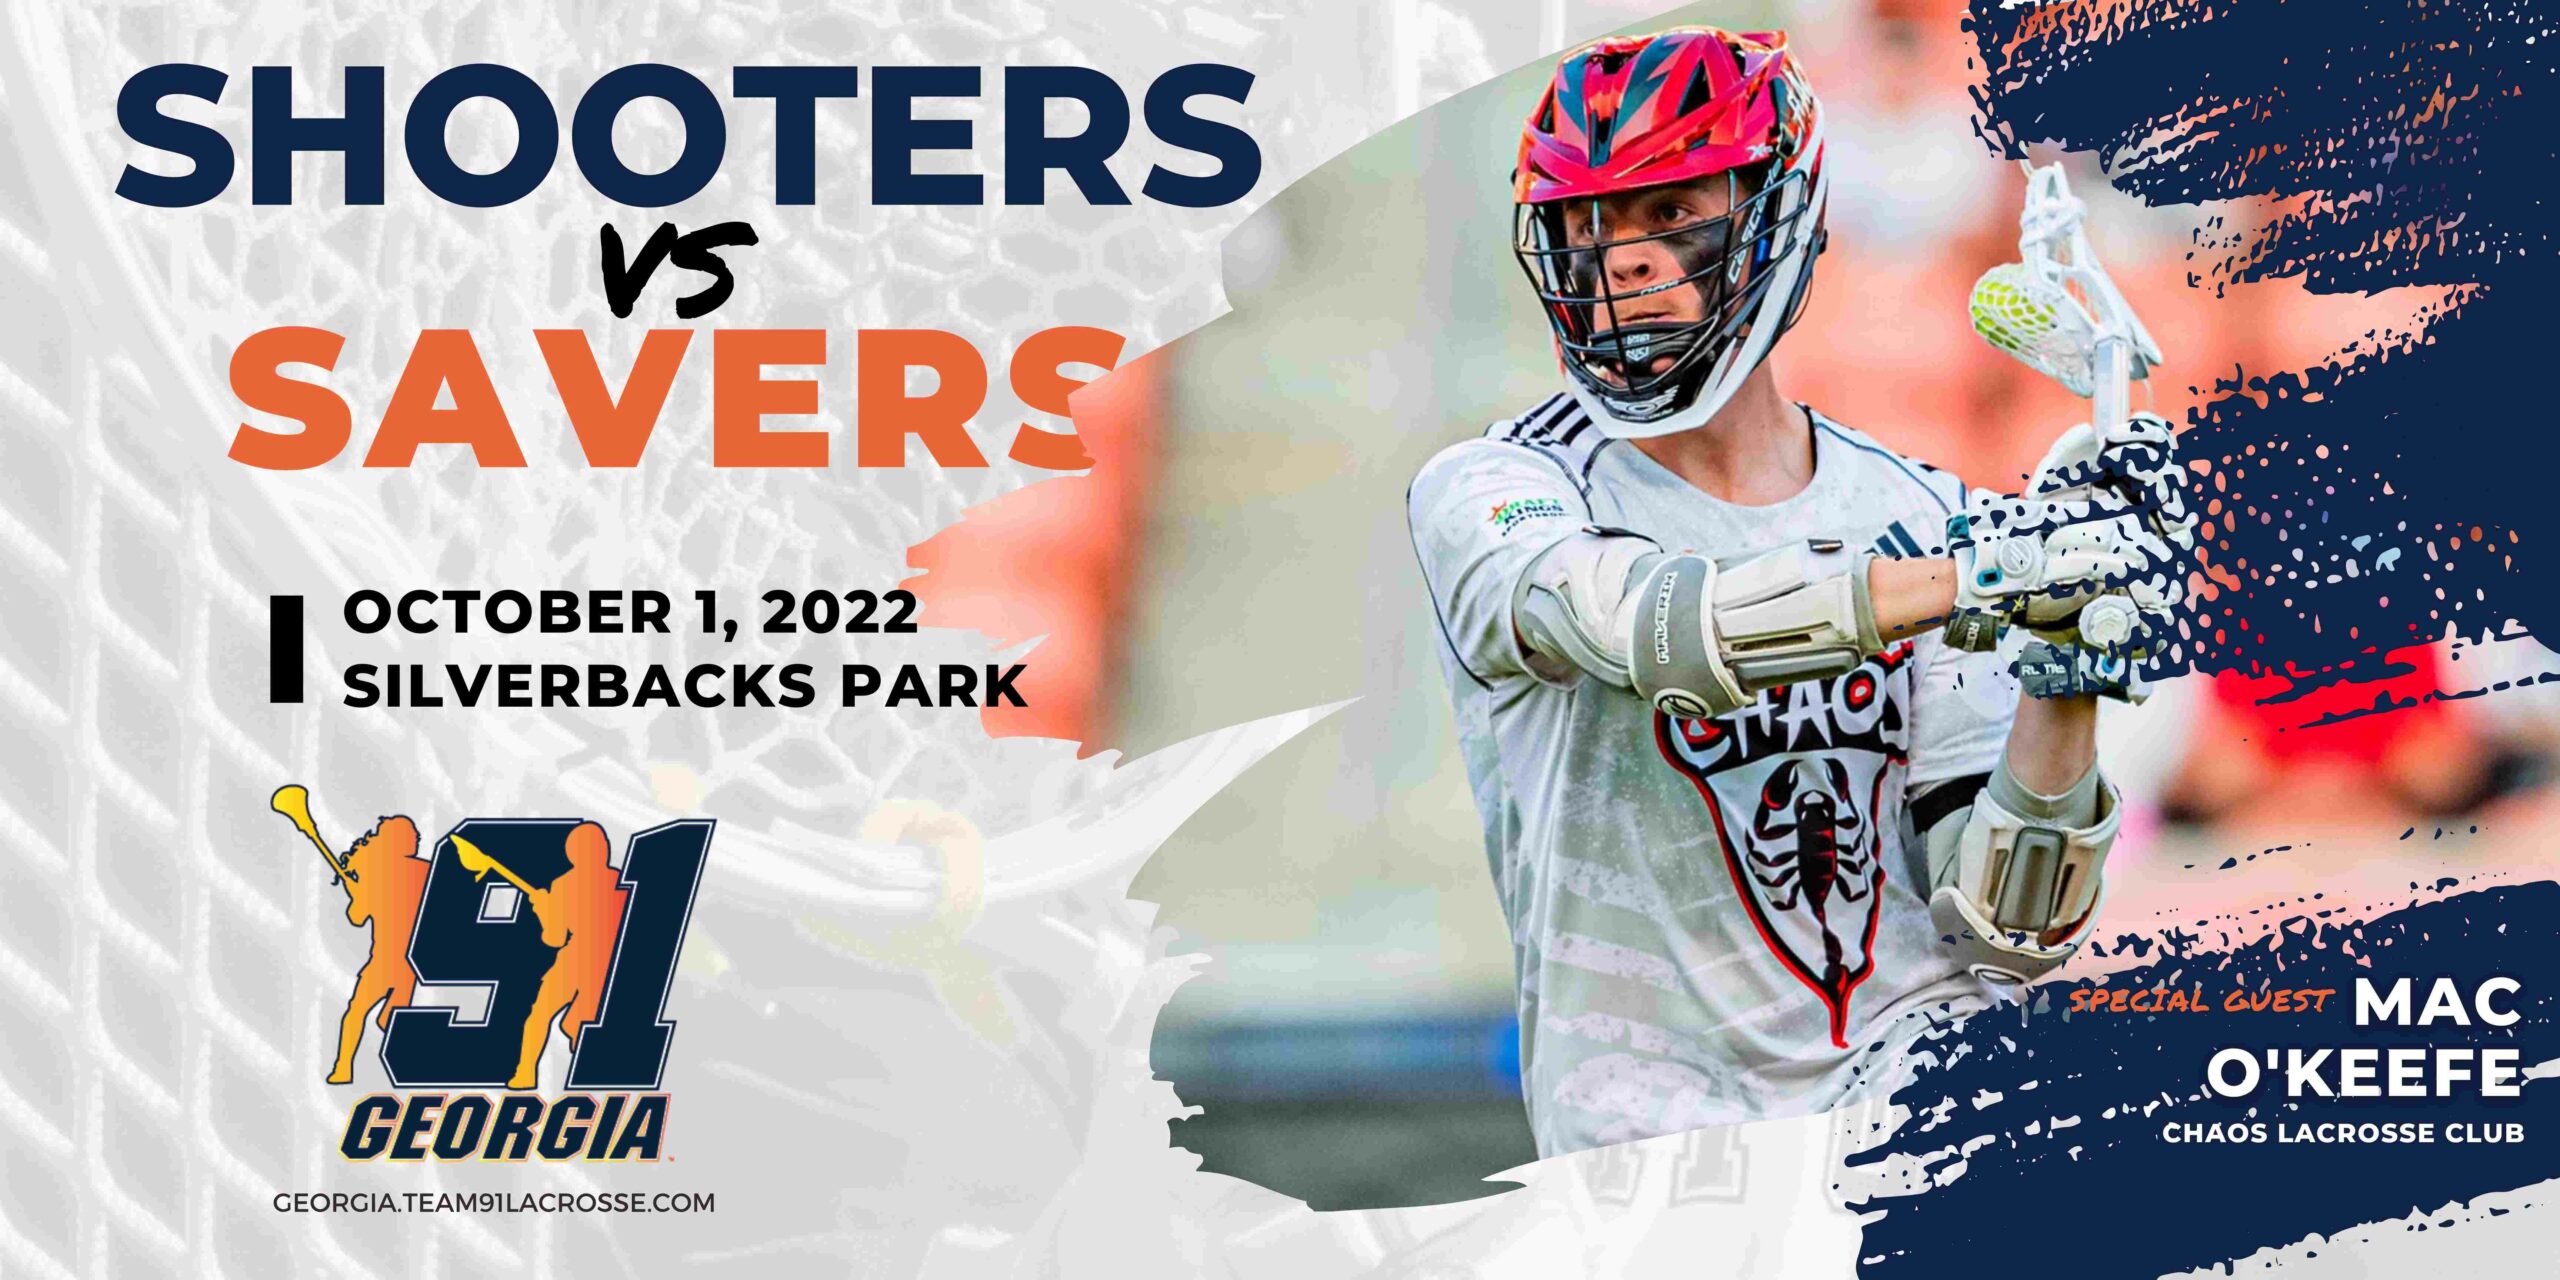 Shooters vs Savers &#8211; October 1, 2022